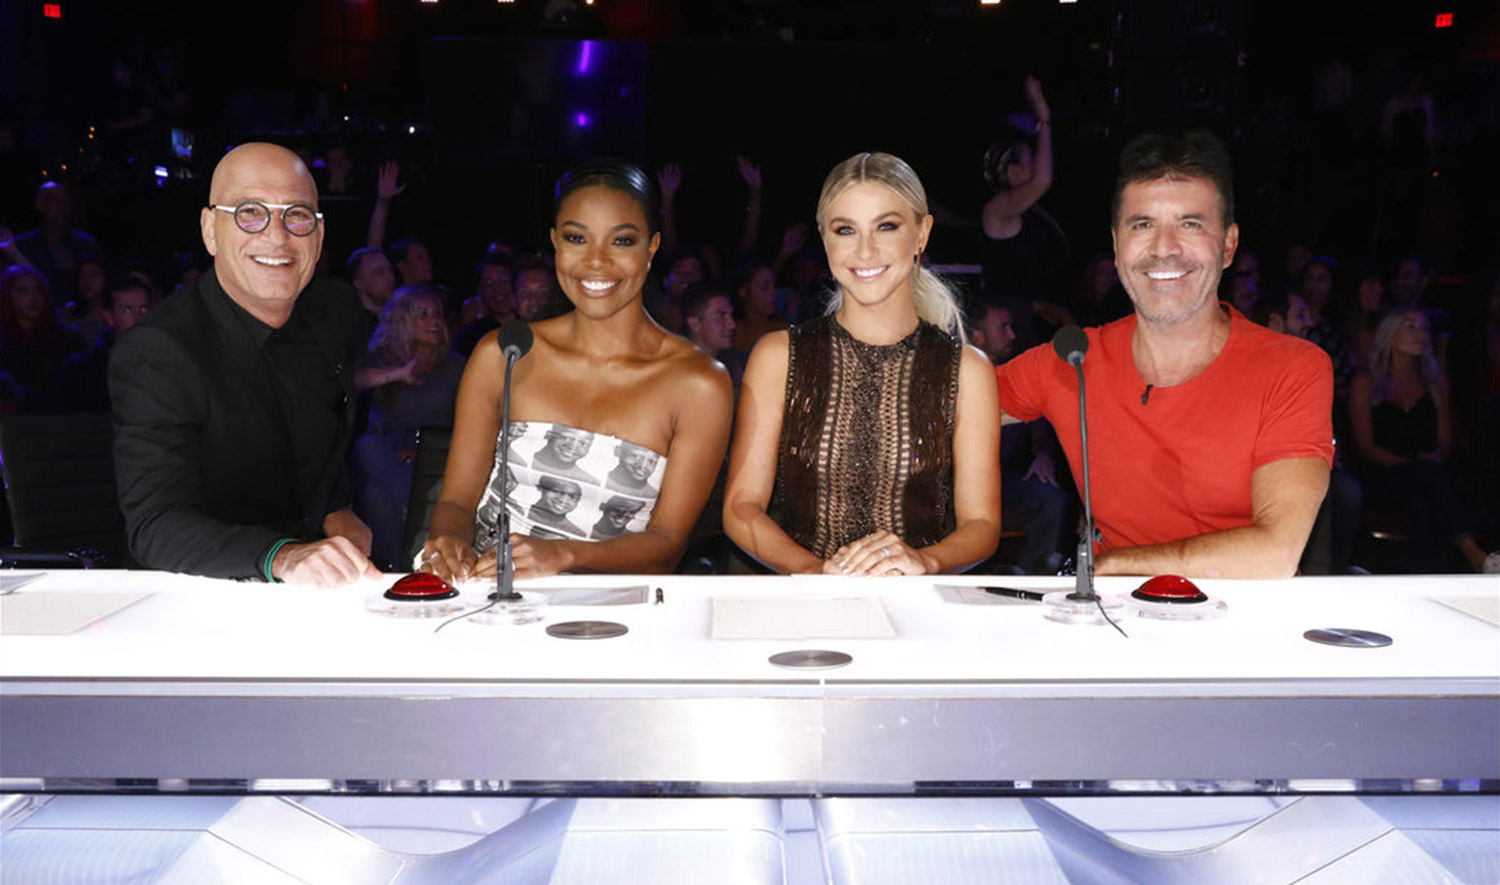 This image released by NBC shows celebrity judges, from left, Howie Mandel, Gabrielle Union, Julianne Hough, Simon Cowell on the set of "America's Got Talent," in Los Angeles. Union is thanking supporters for defending her amid reports she was fired from “America’s Got Talent” after complaining about racism and other on-set issues. Without directly addressing her status with NBC’s talent show, the actress tweeted that the backing helped overcome feeling of being lost and alone. (Trae Patton/NBC via AP)